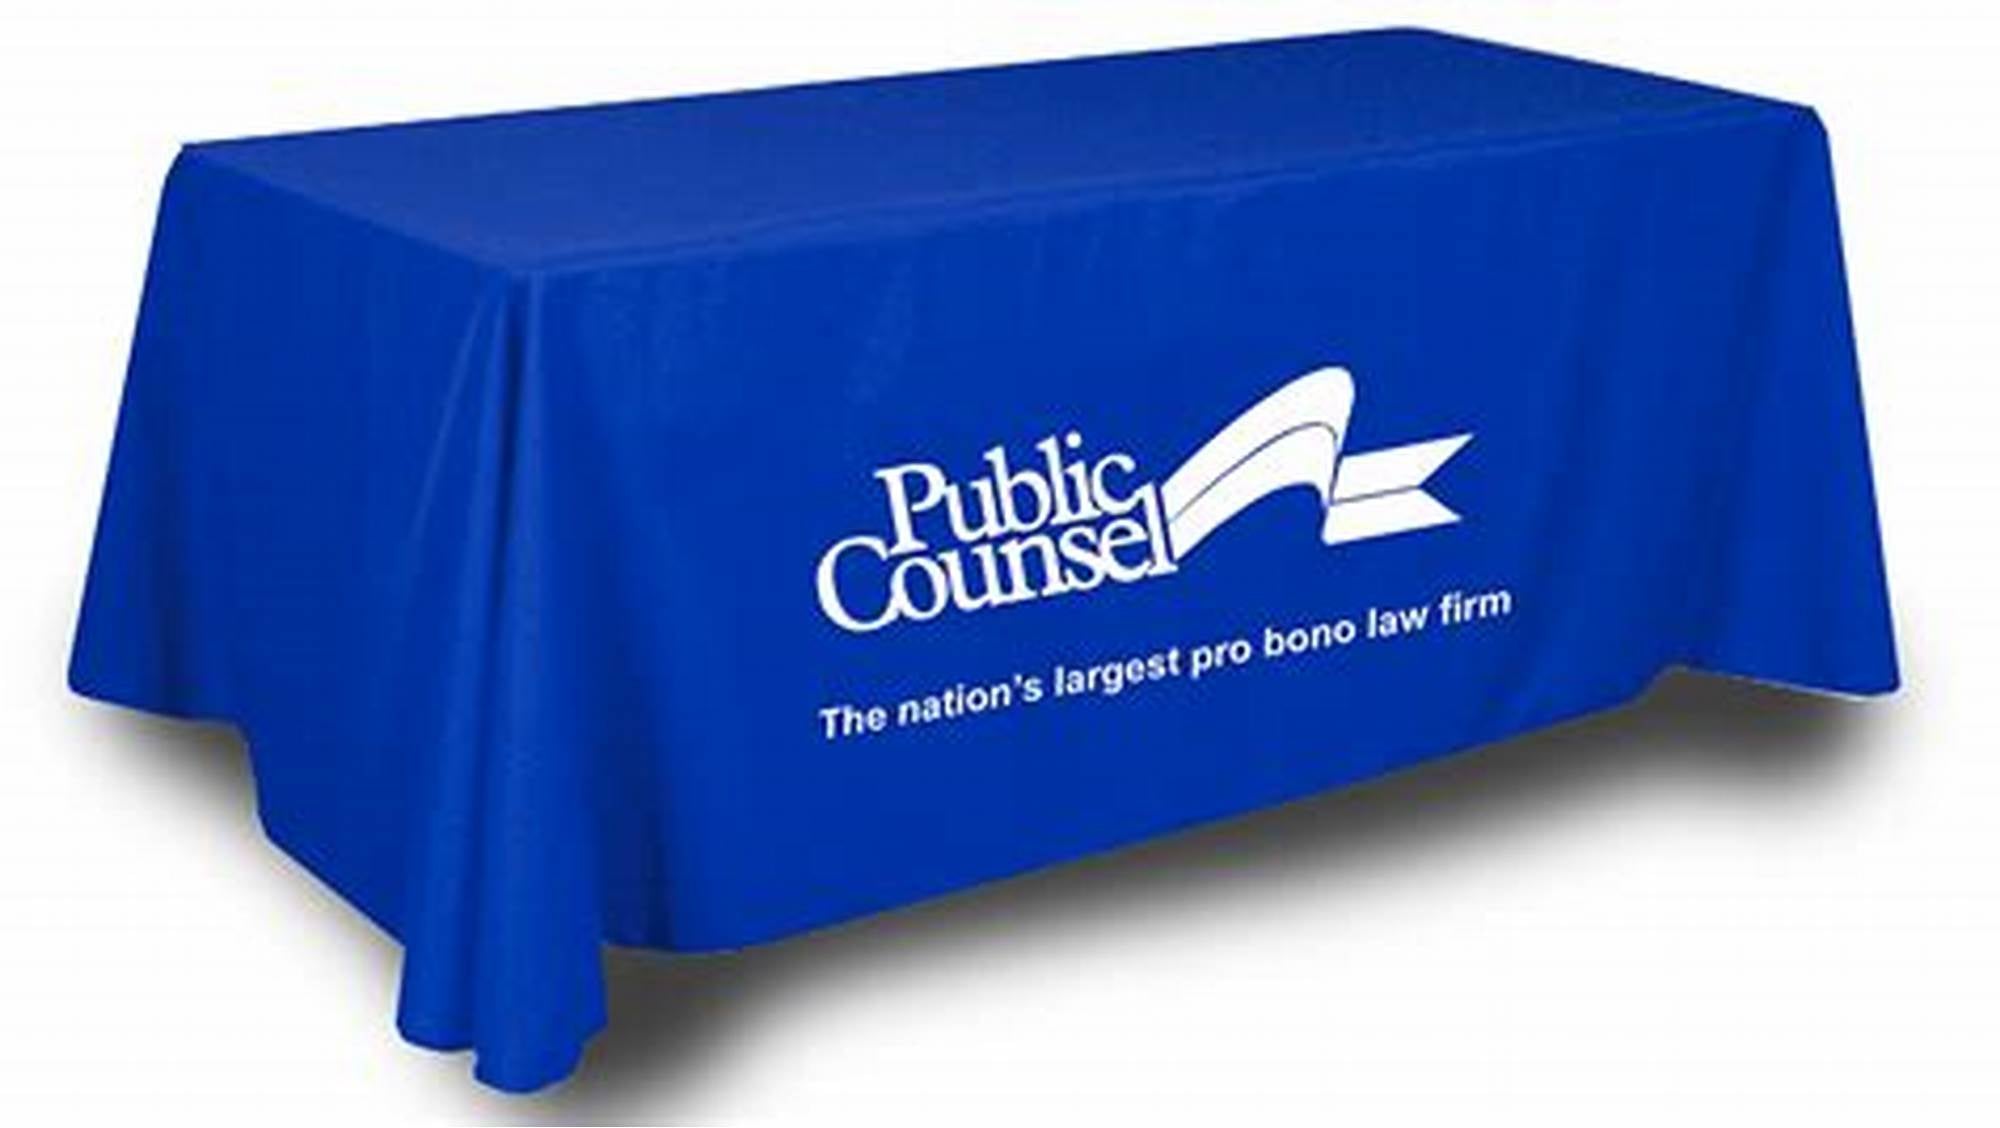 High visibility custom table cover designed to attract attention at events